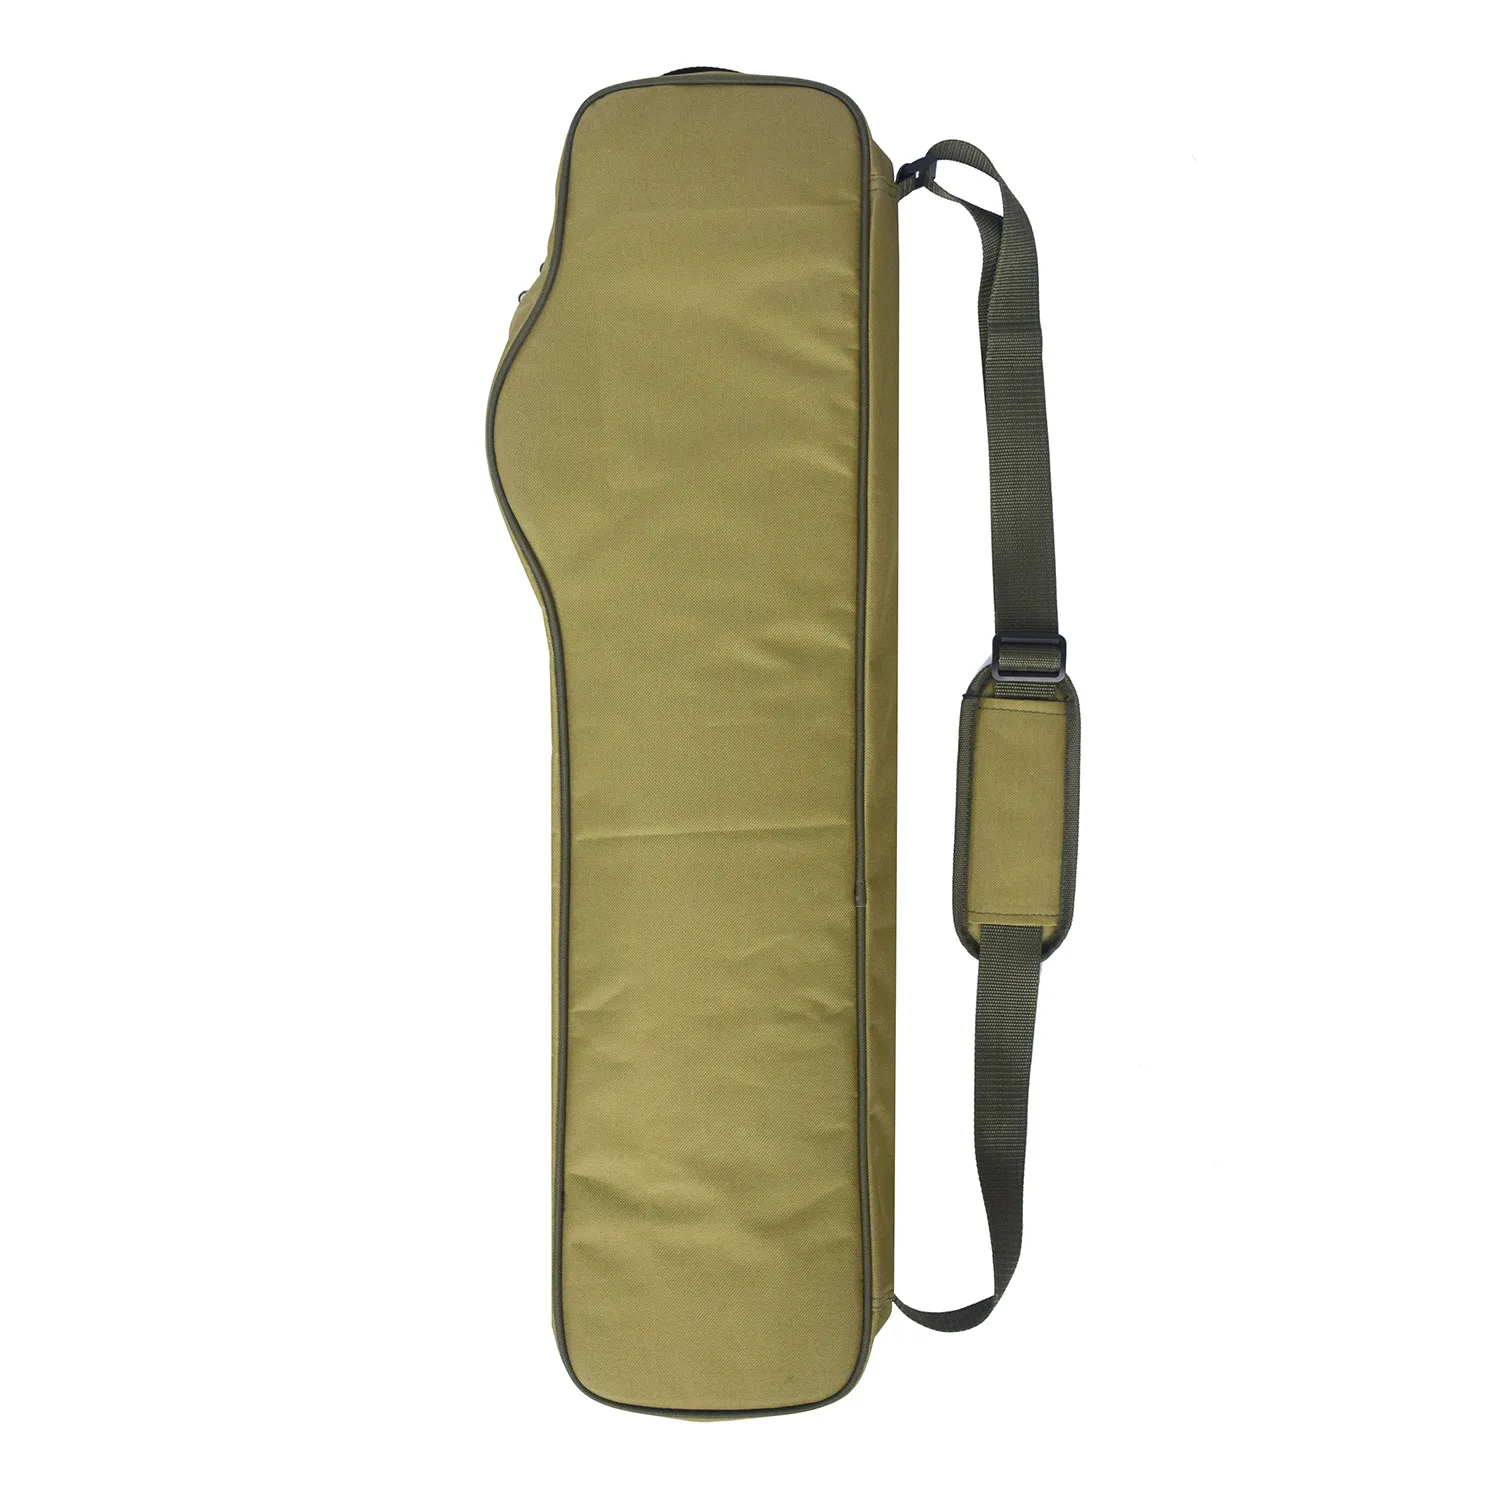 Fishing Rod Bag 600D Oxford Cloth Fishing Rod Storage Bag Fishing Reel Case Tackle Carrier Pouch Accessories Bag enlarge